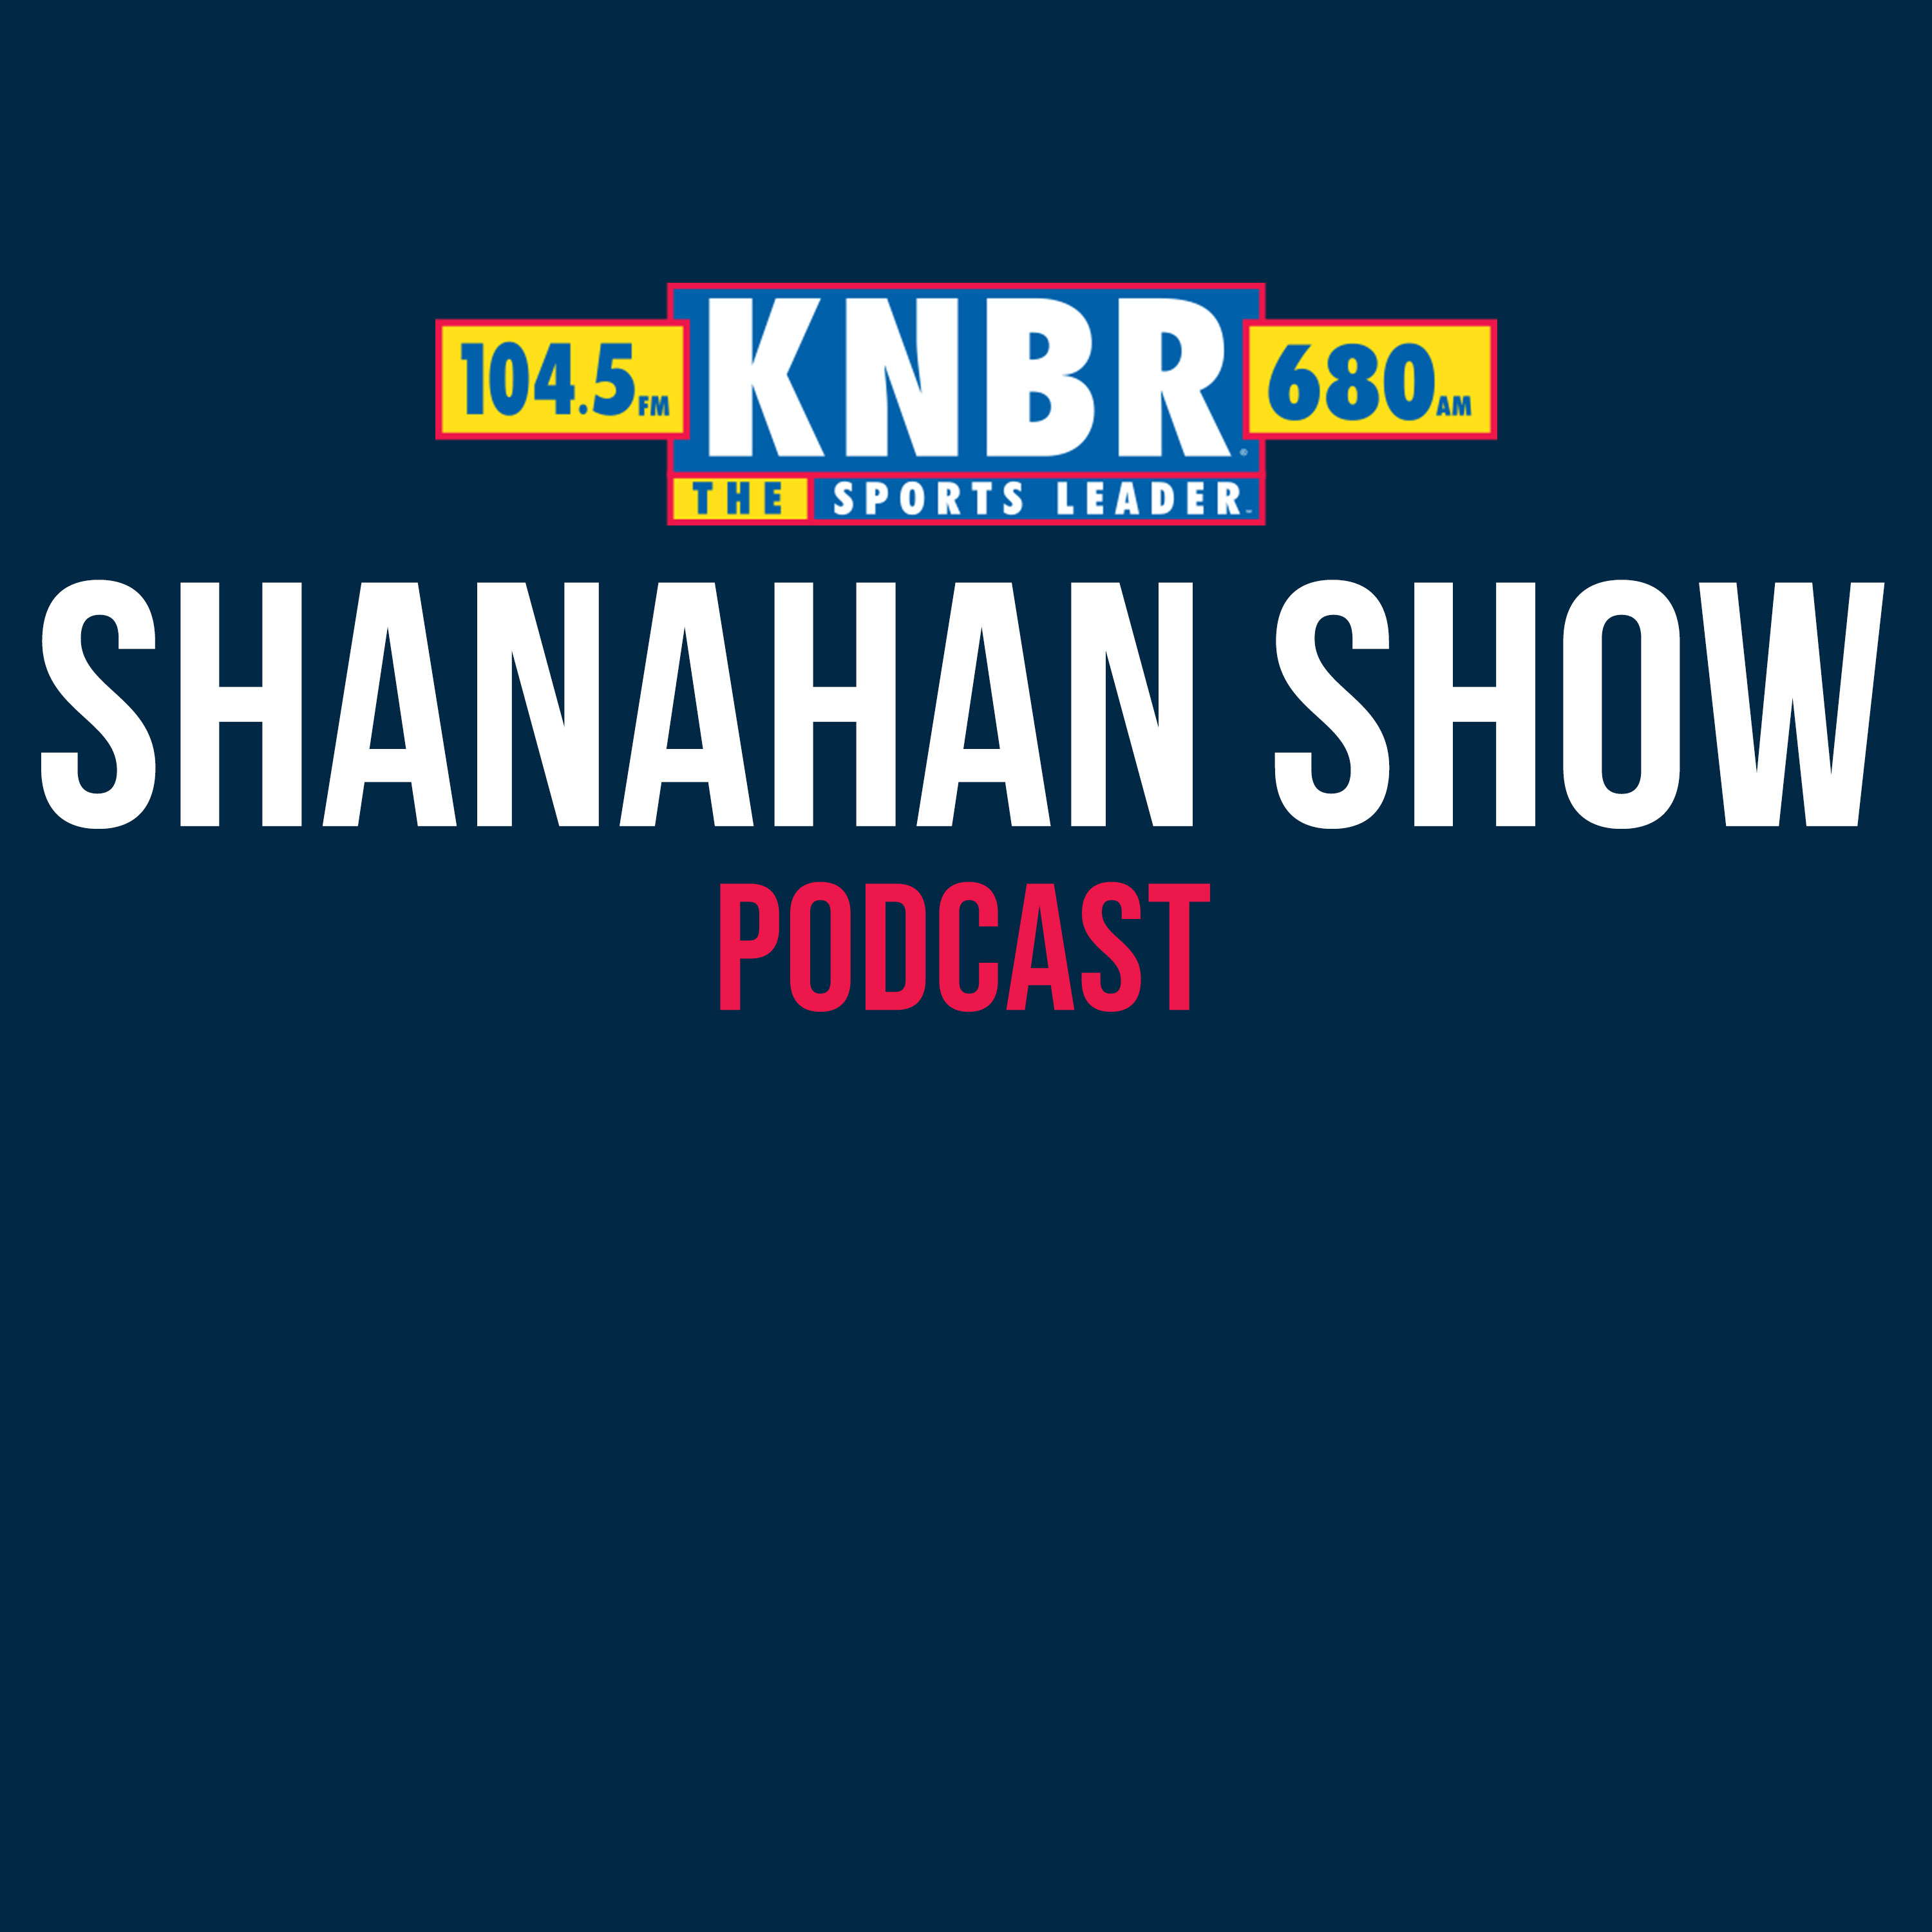 11-30 Kyle Shanahan joins Tolbert & Copes to discuss Sunday's huge matchup in Philadelphia